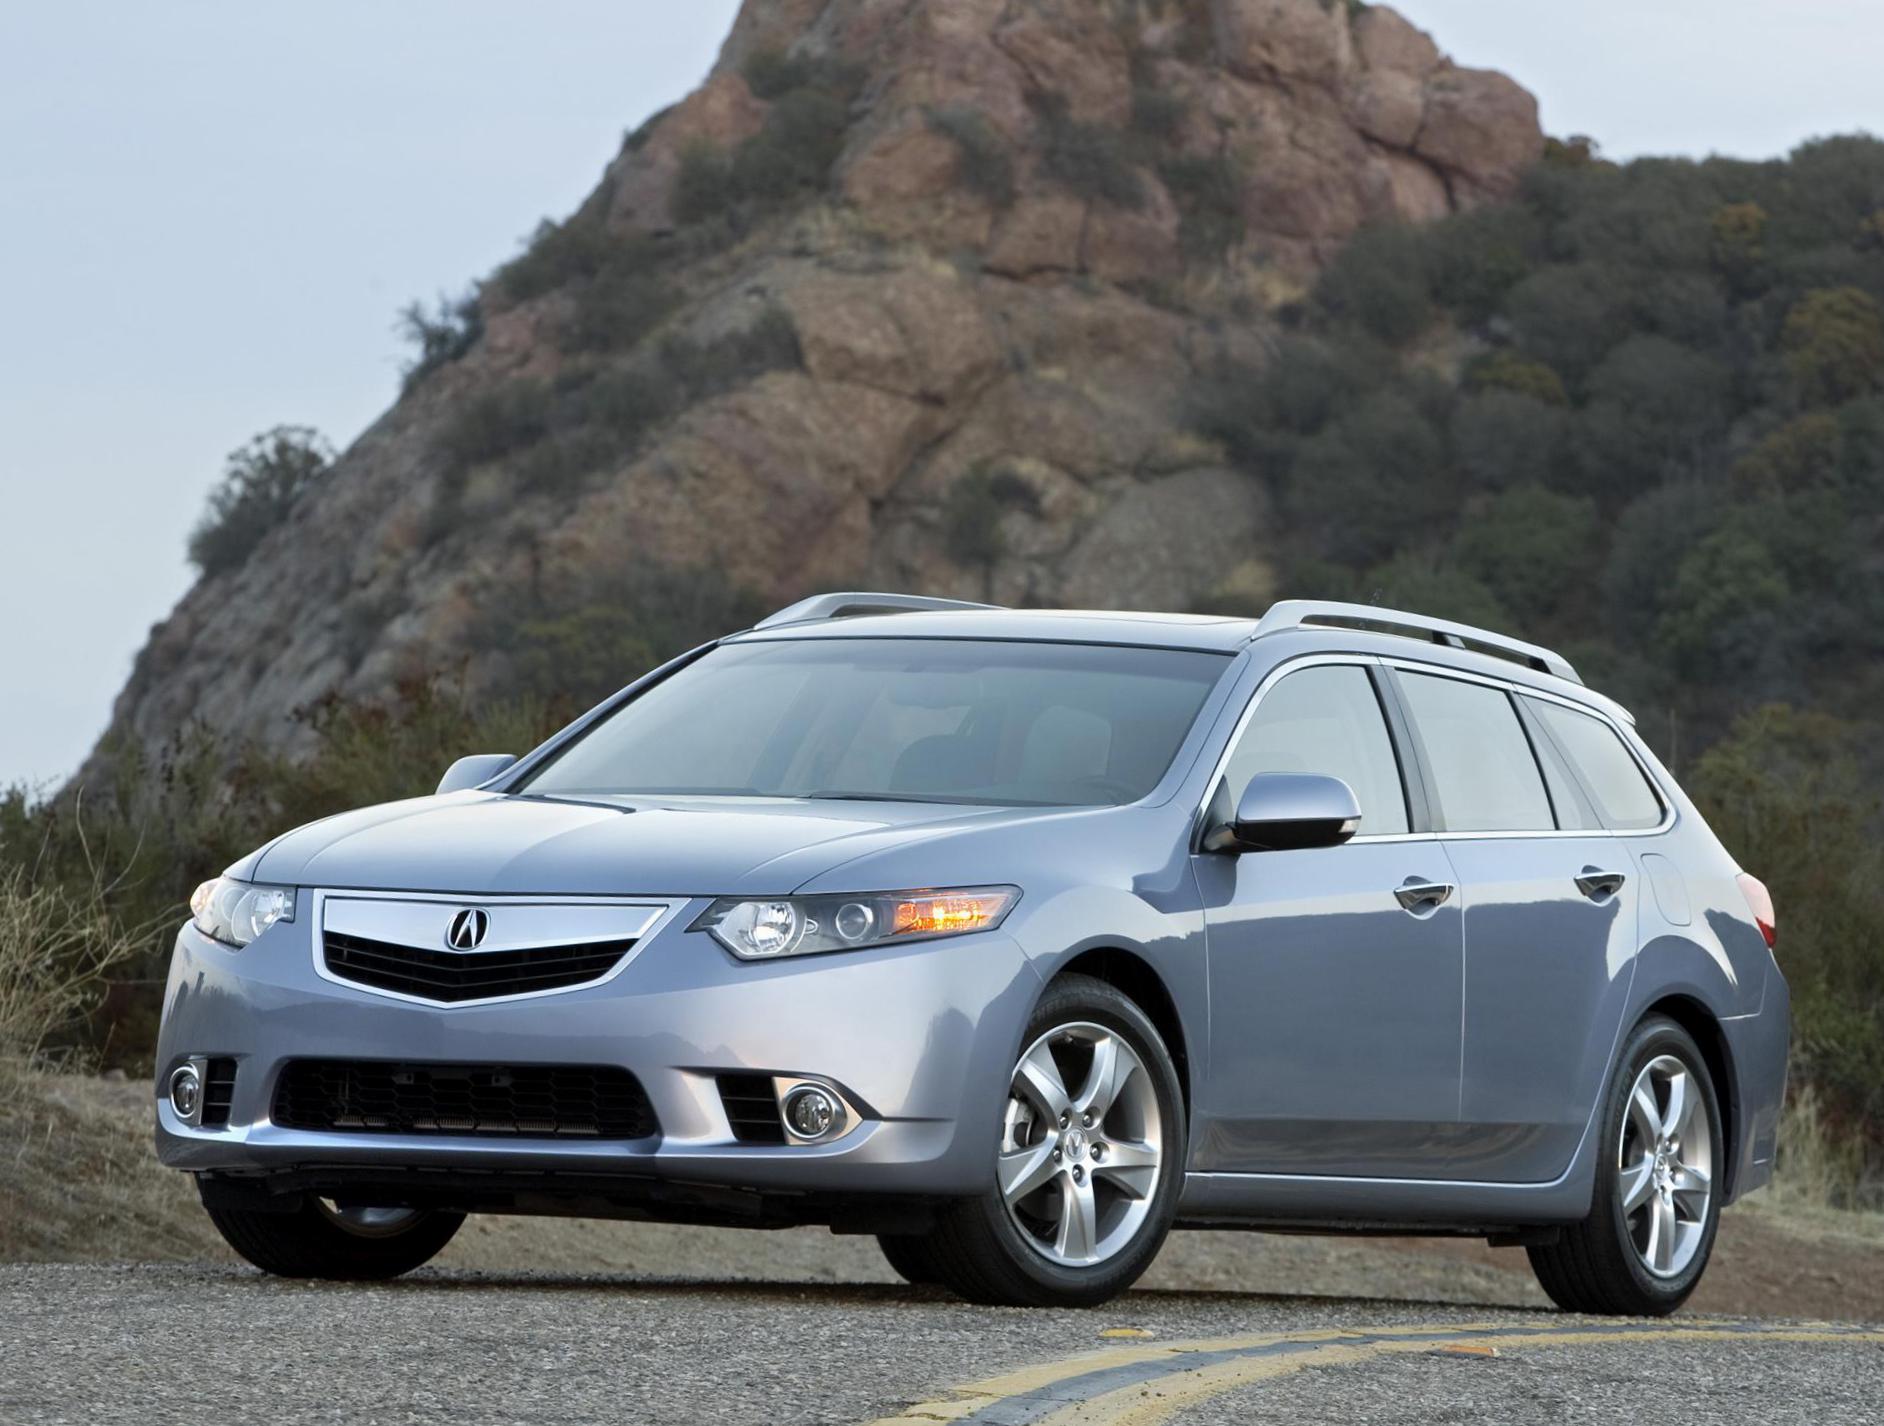 TSX Sport Wagon Acura approved 2007